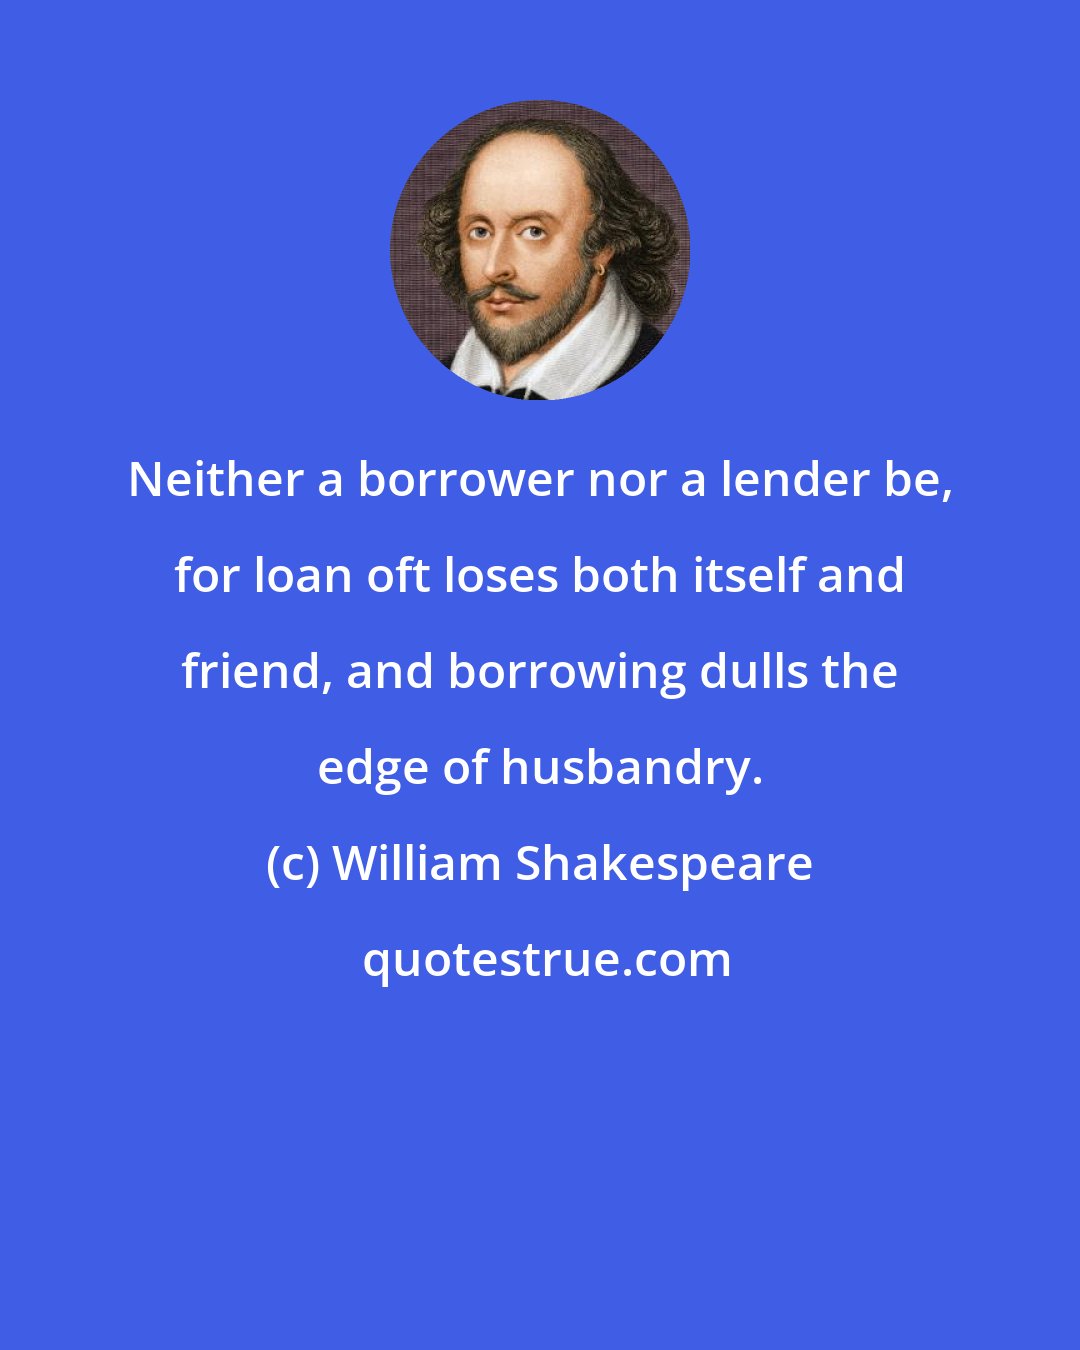 William Shakespeare: Neither a borrower nor a lender be, for loan oft loses both itself and friend, and borrowing dulls the edge of husbandry.